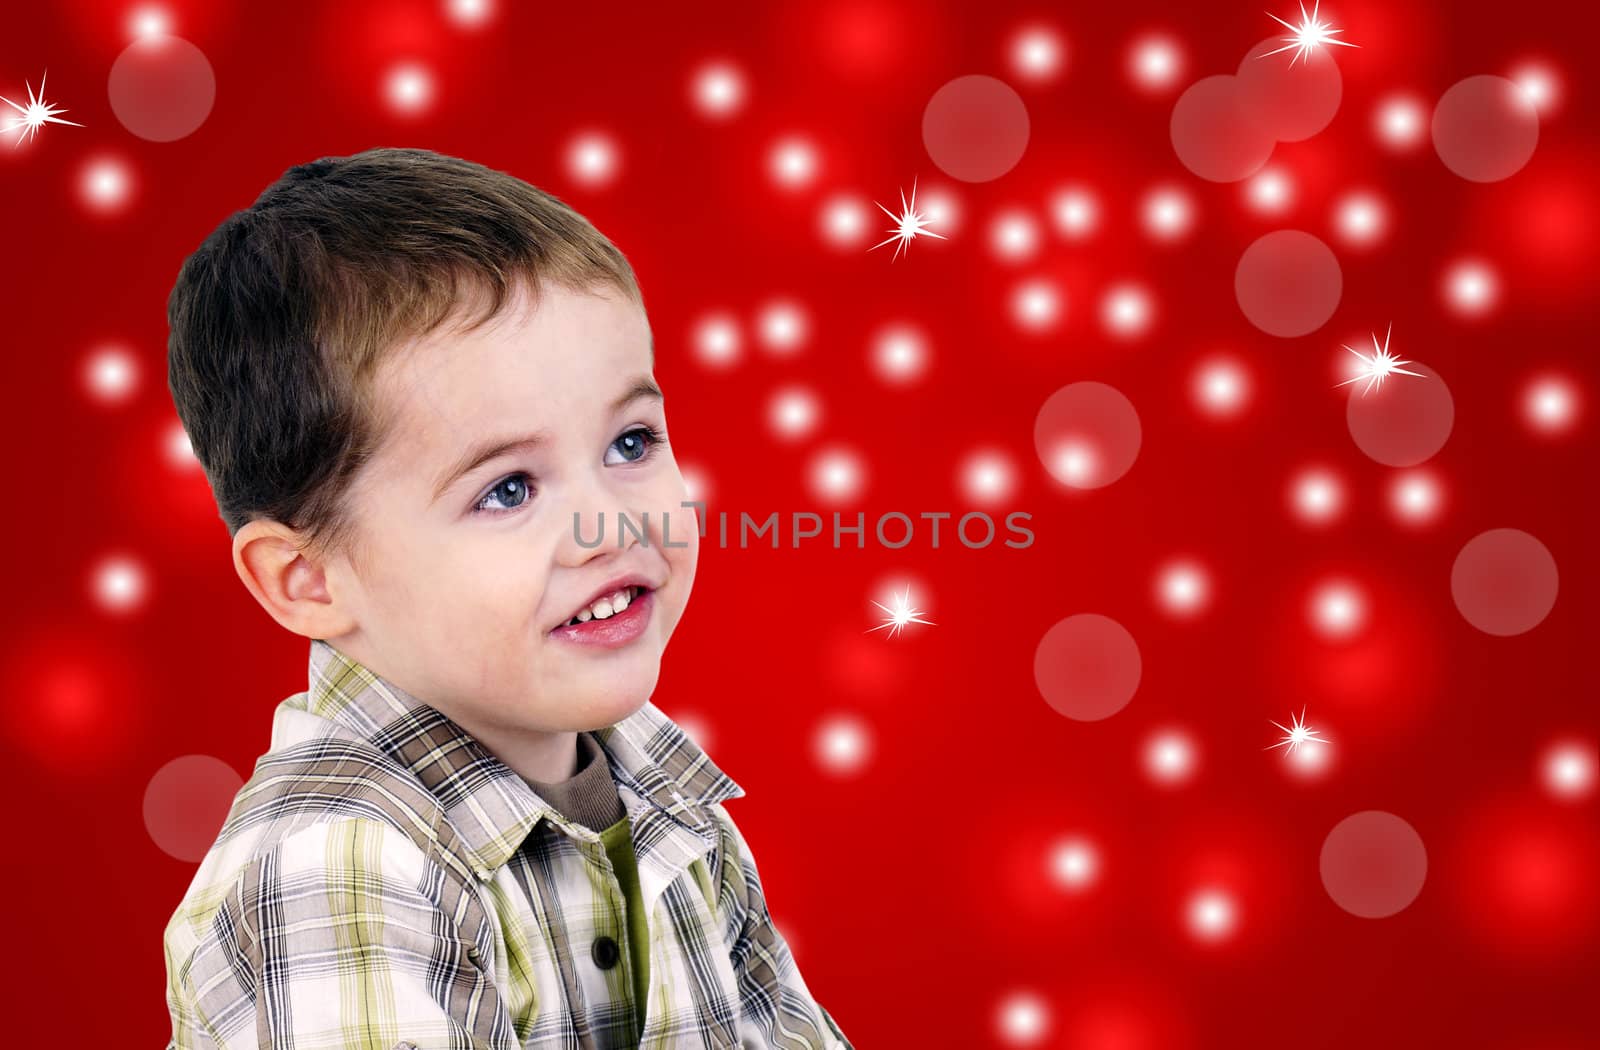 Cute little boy on red background with lights by Mirage3